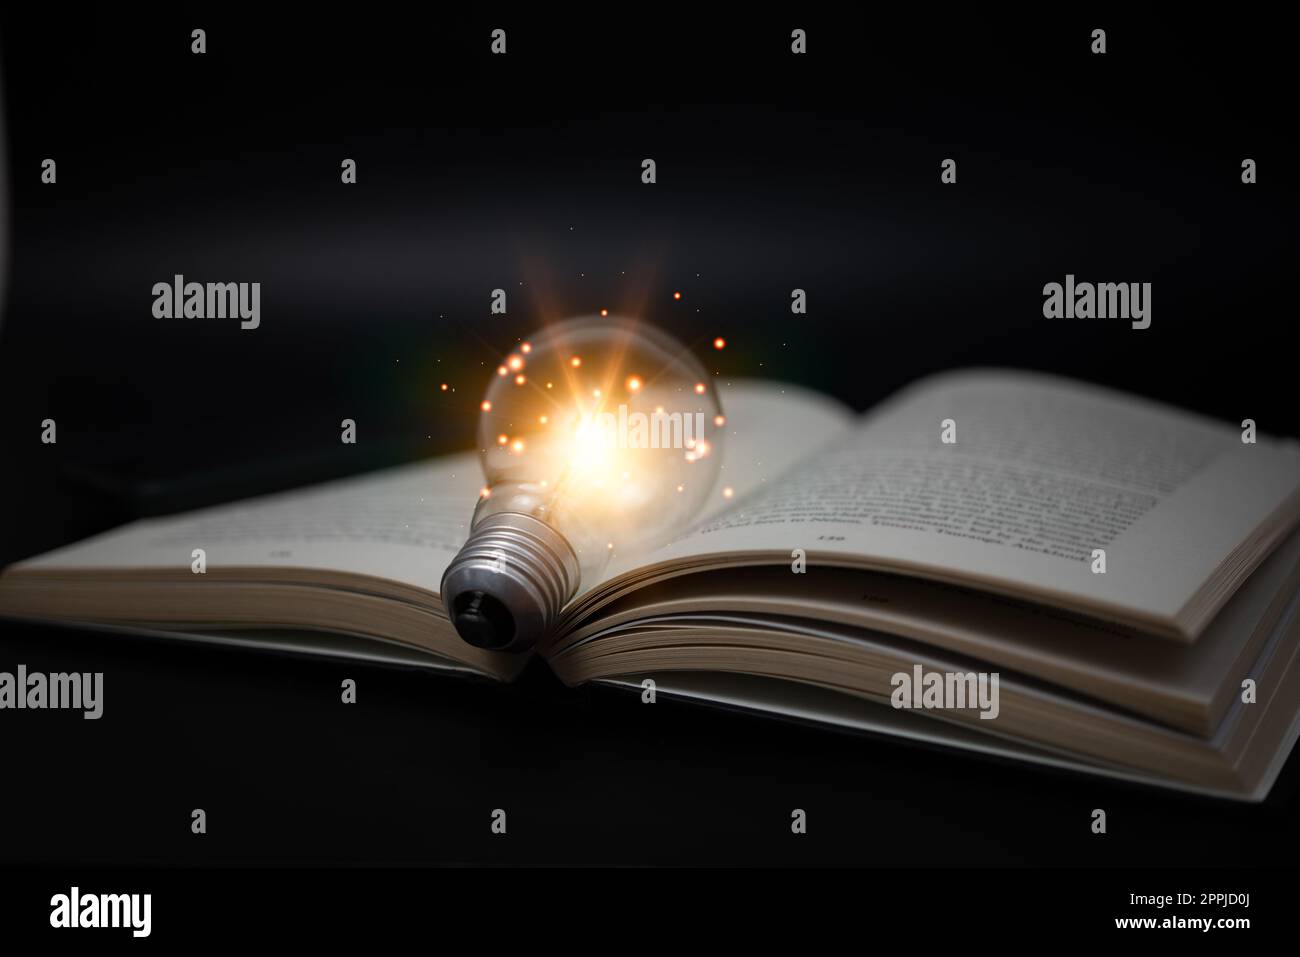 Bright lamp or glowing light bulb with book or textbook. Business success idea or solution concept. Thinking power of business person or professional. Working, studying or learning inspiration Stock Photo